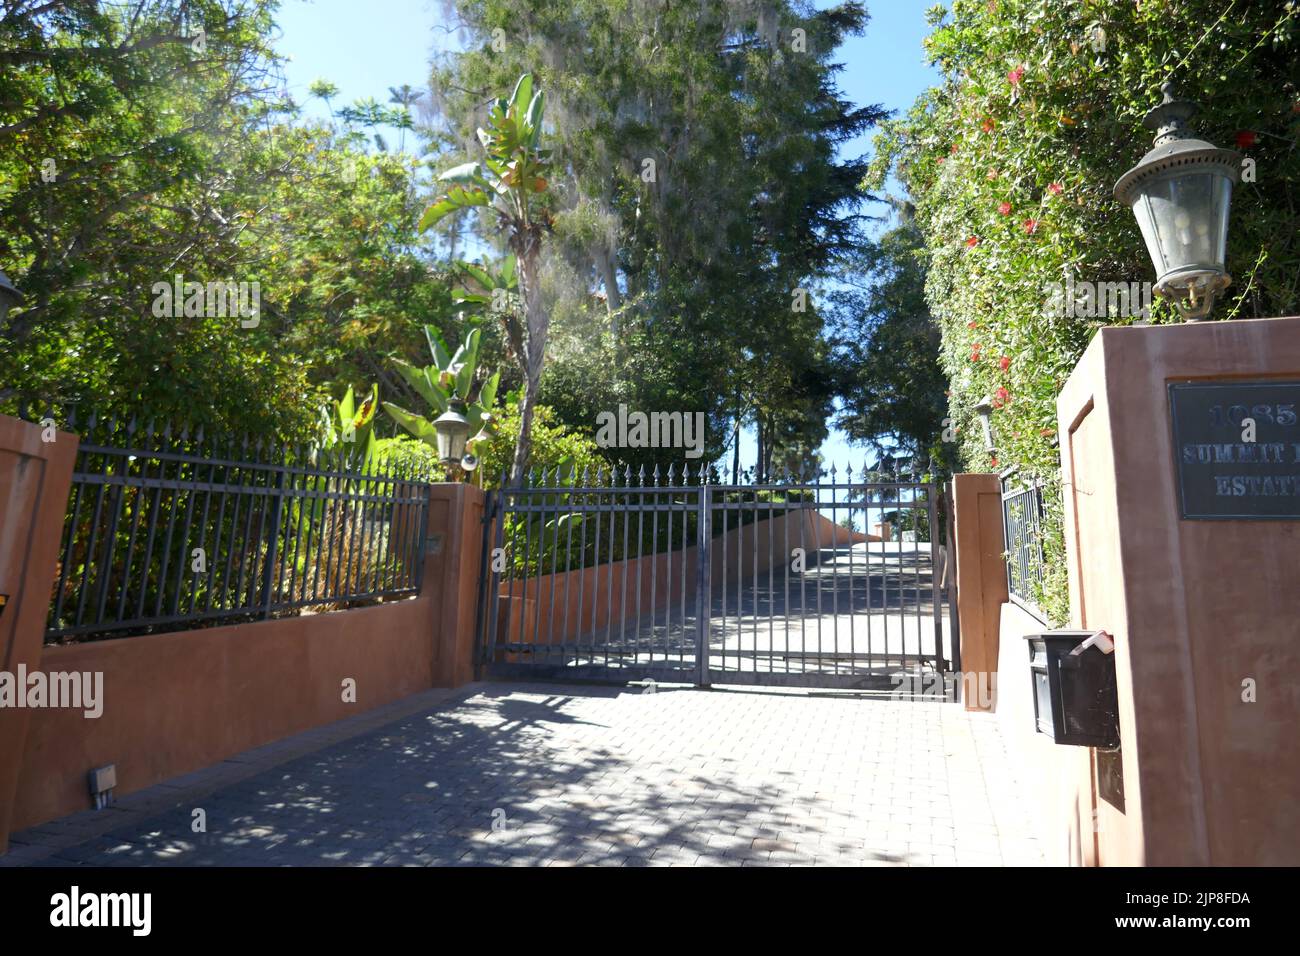 Beverly Hills, California, USA 15th August 2022 Actor Charlie Chaplin's Former Home/Estate at 1085 Summit Drive on August 15, 2022 in Beverly Hills, California, USA. Photo by Barry King/Alamy Stock Photo Stock Photo